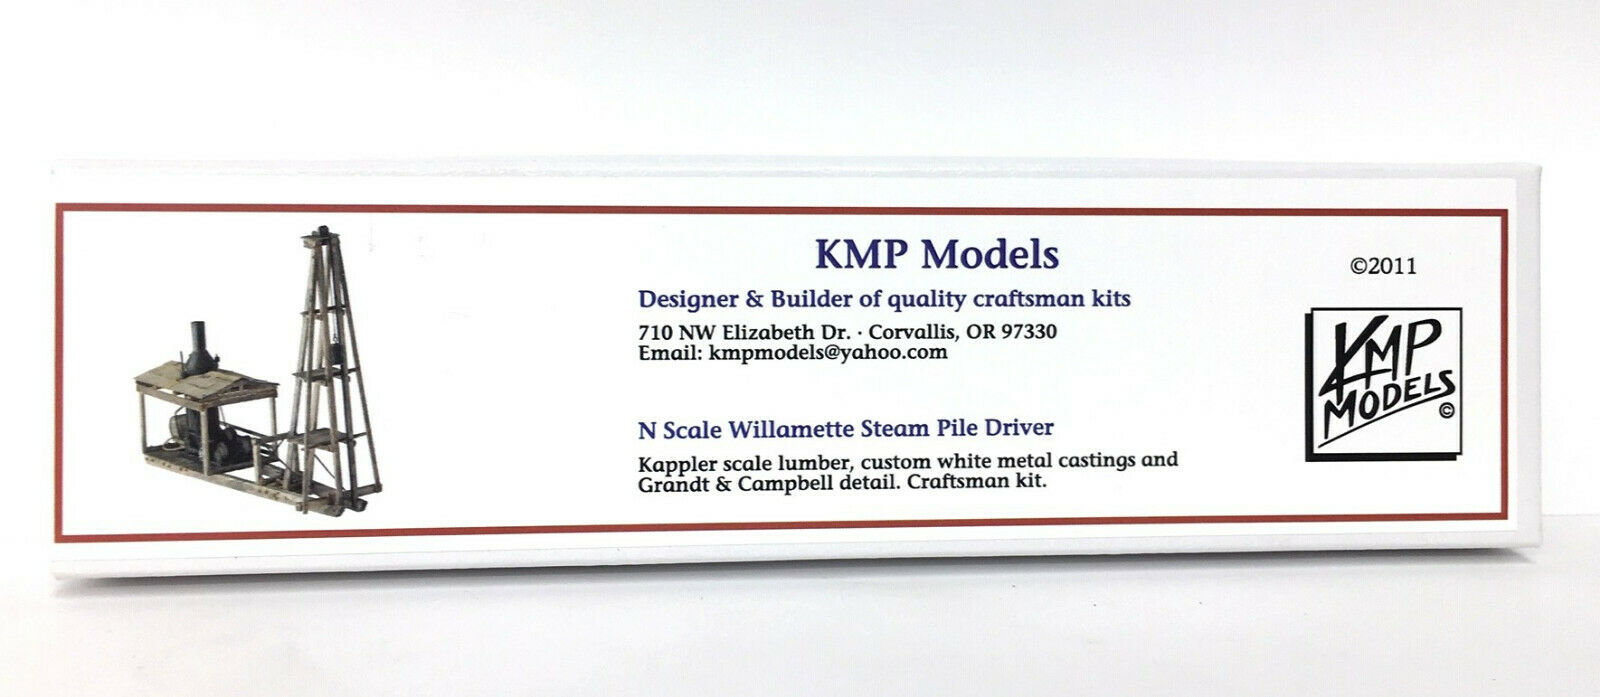 N Scale - KMP Models - N-Pile Driver - Structure,Industrial, Steam Pile Driver - Industrial Structures